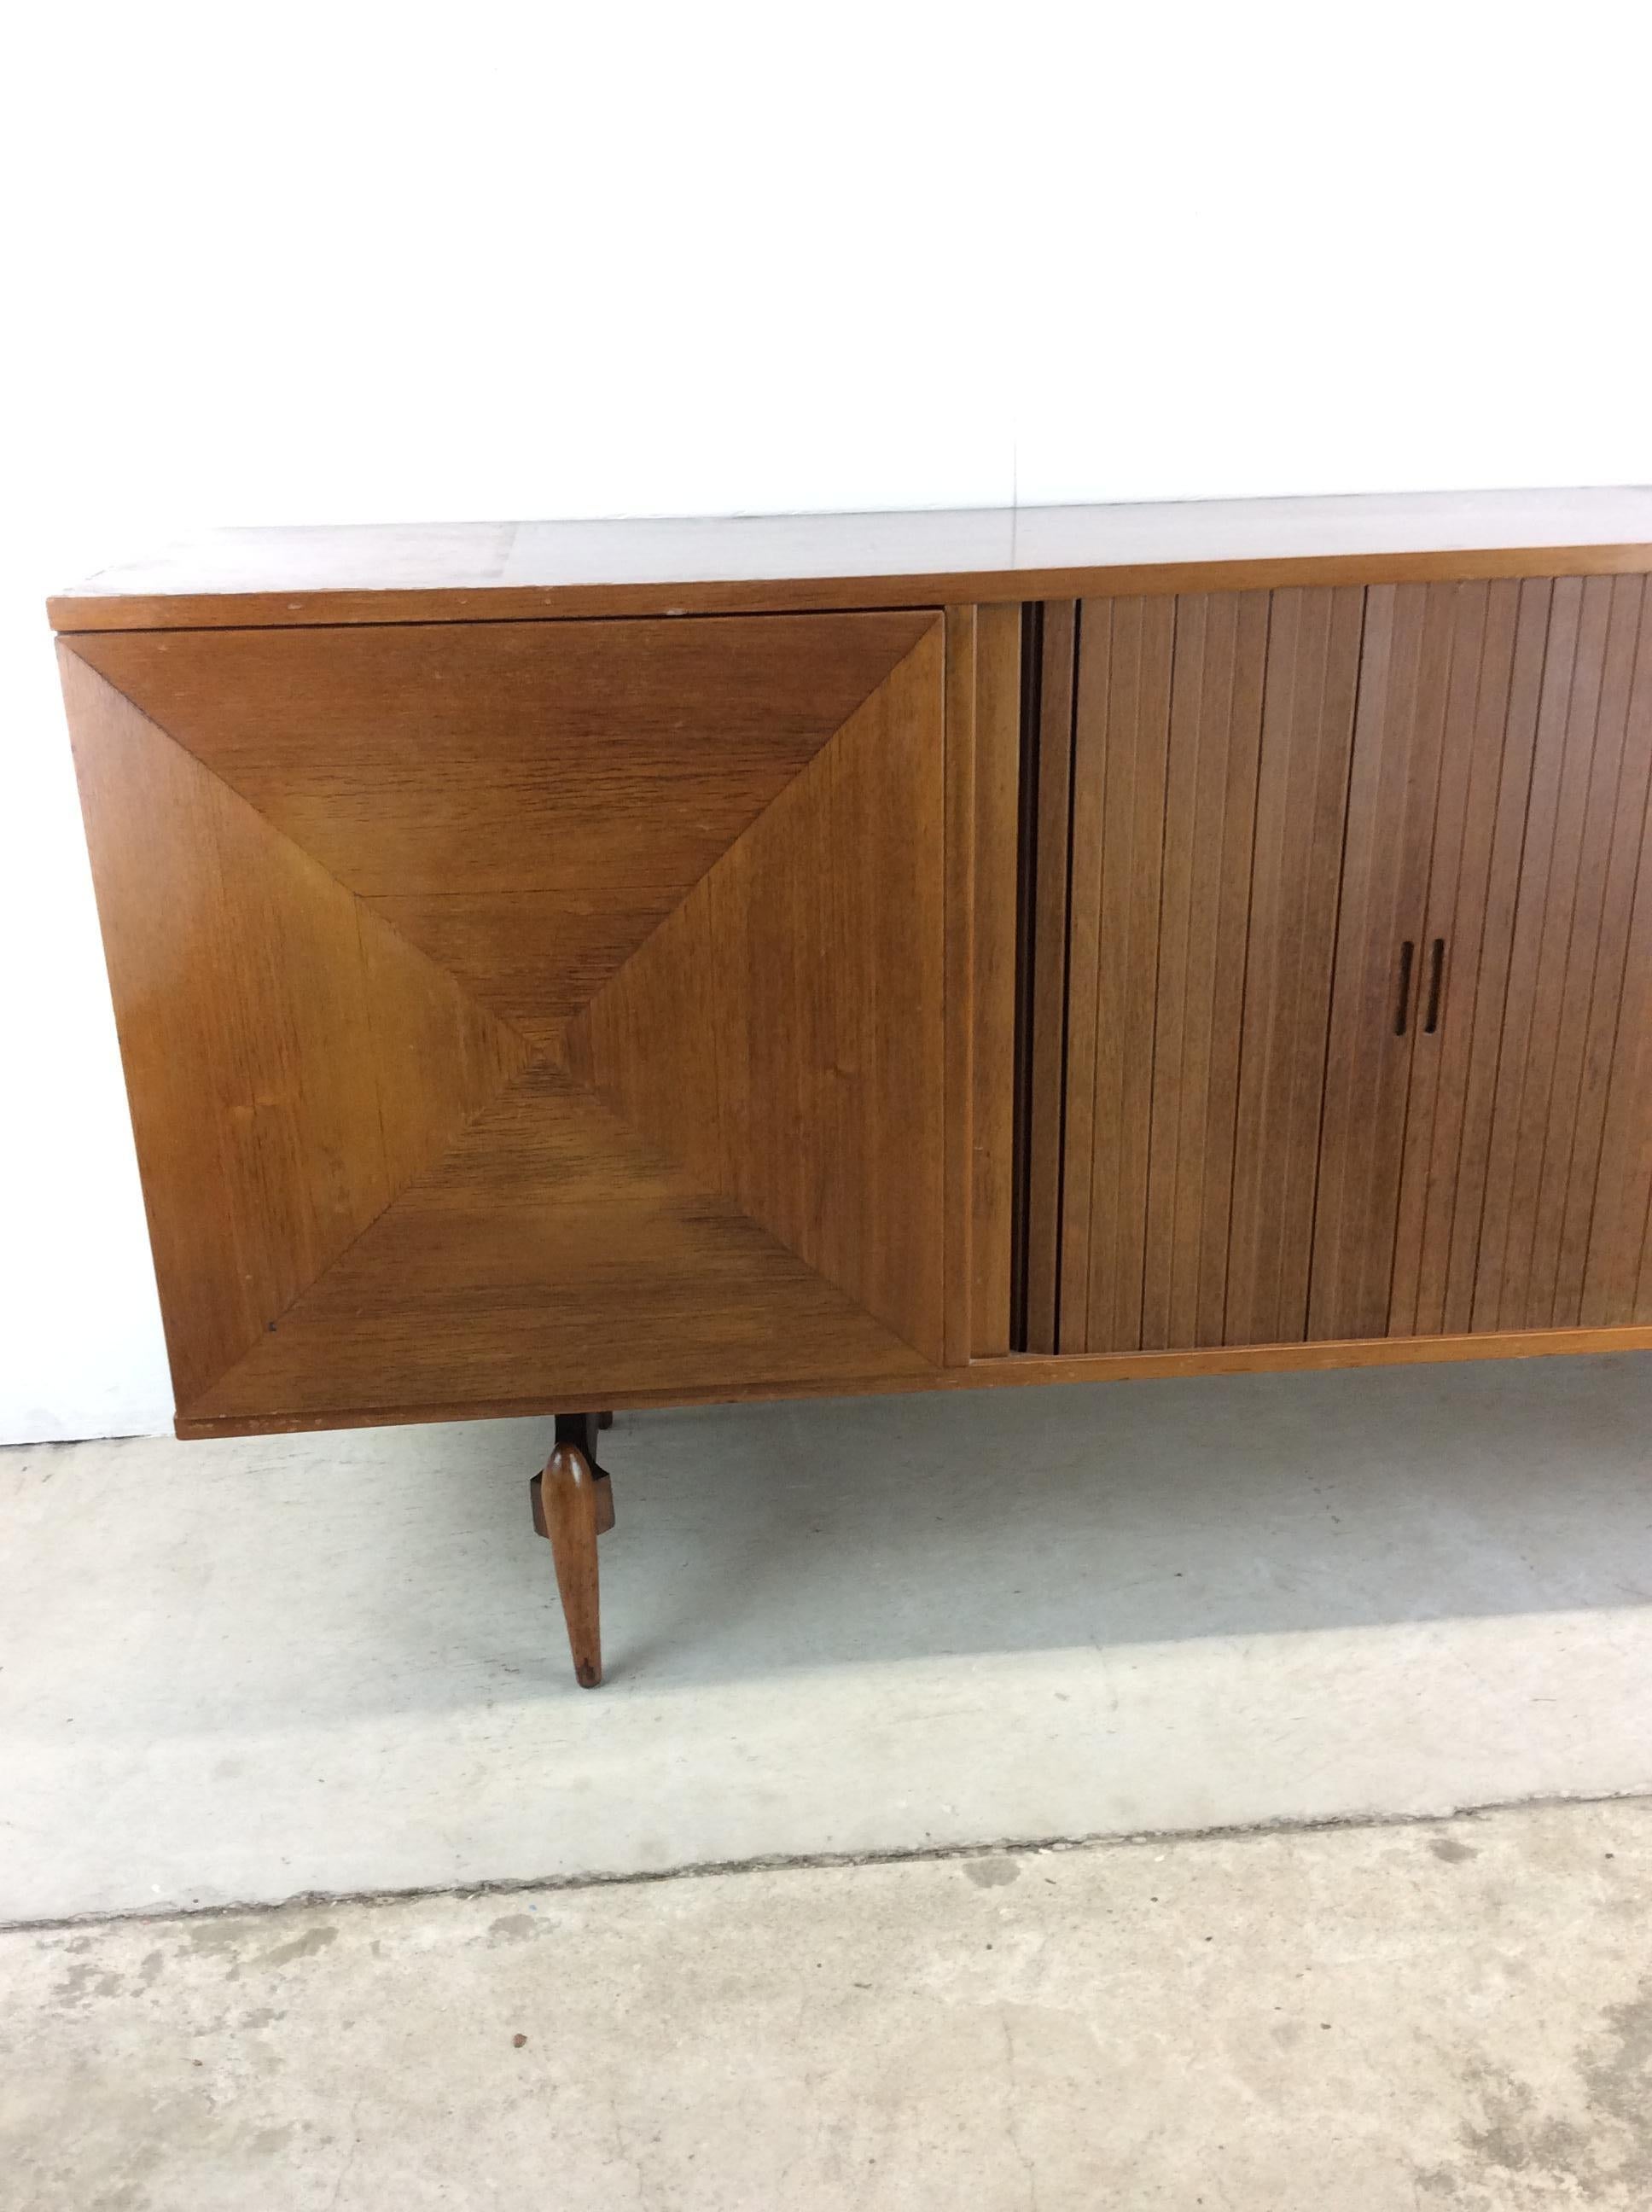 This mid century modern credenza features hardwood construction, walnut veneer with original finish, two diamond fronted cabinet doors with interior shelving, a tambour door with additional shelving, and a unique tapered legs.

Complimentary drop